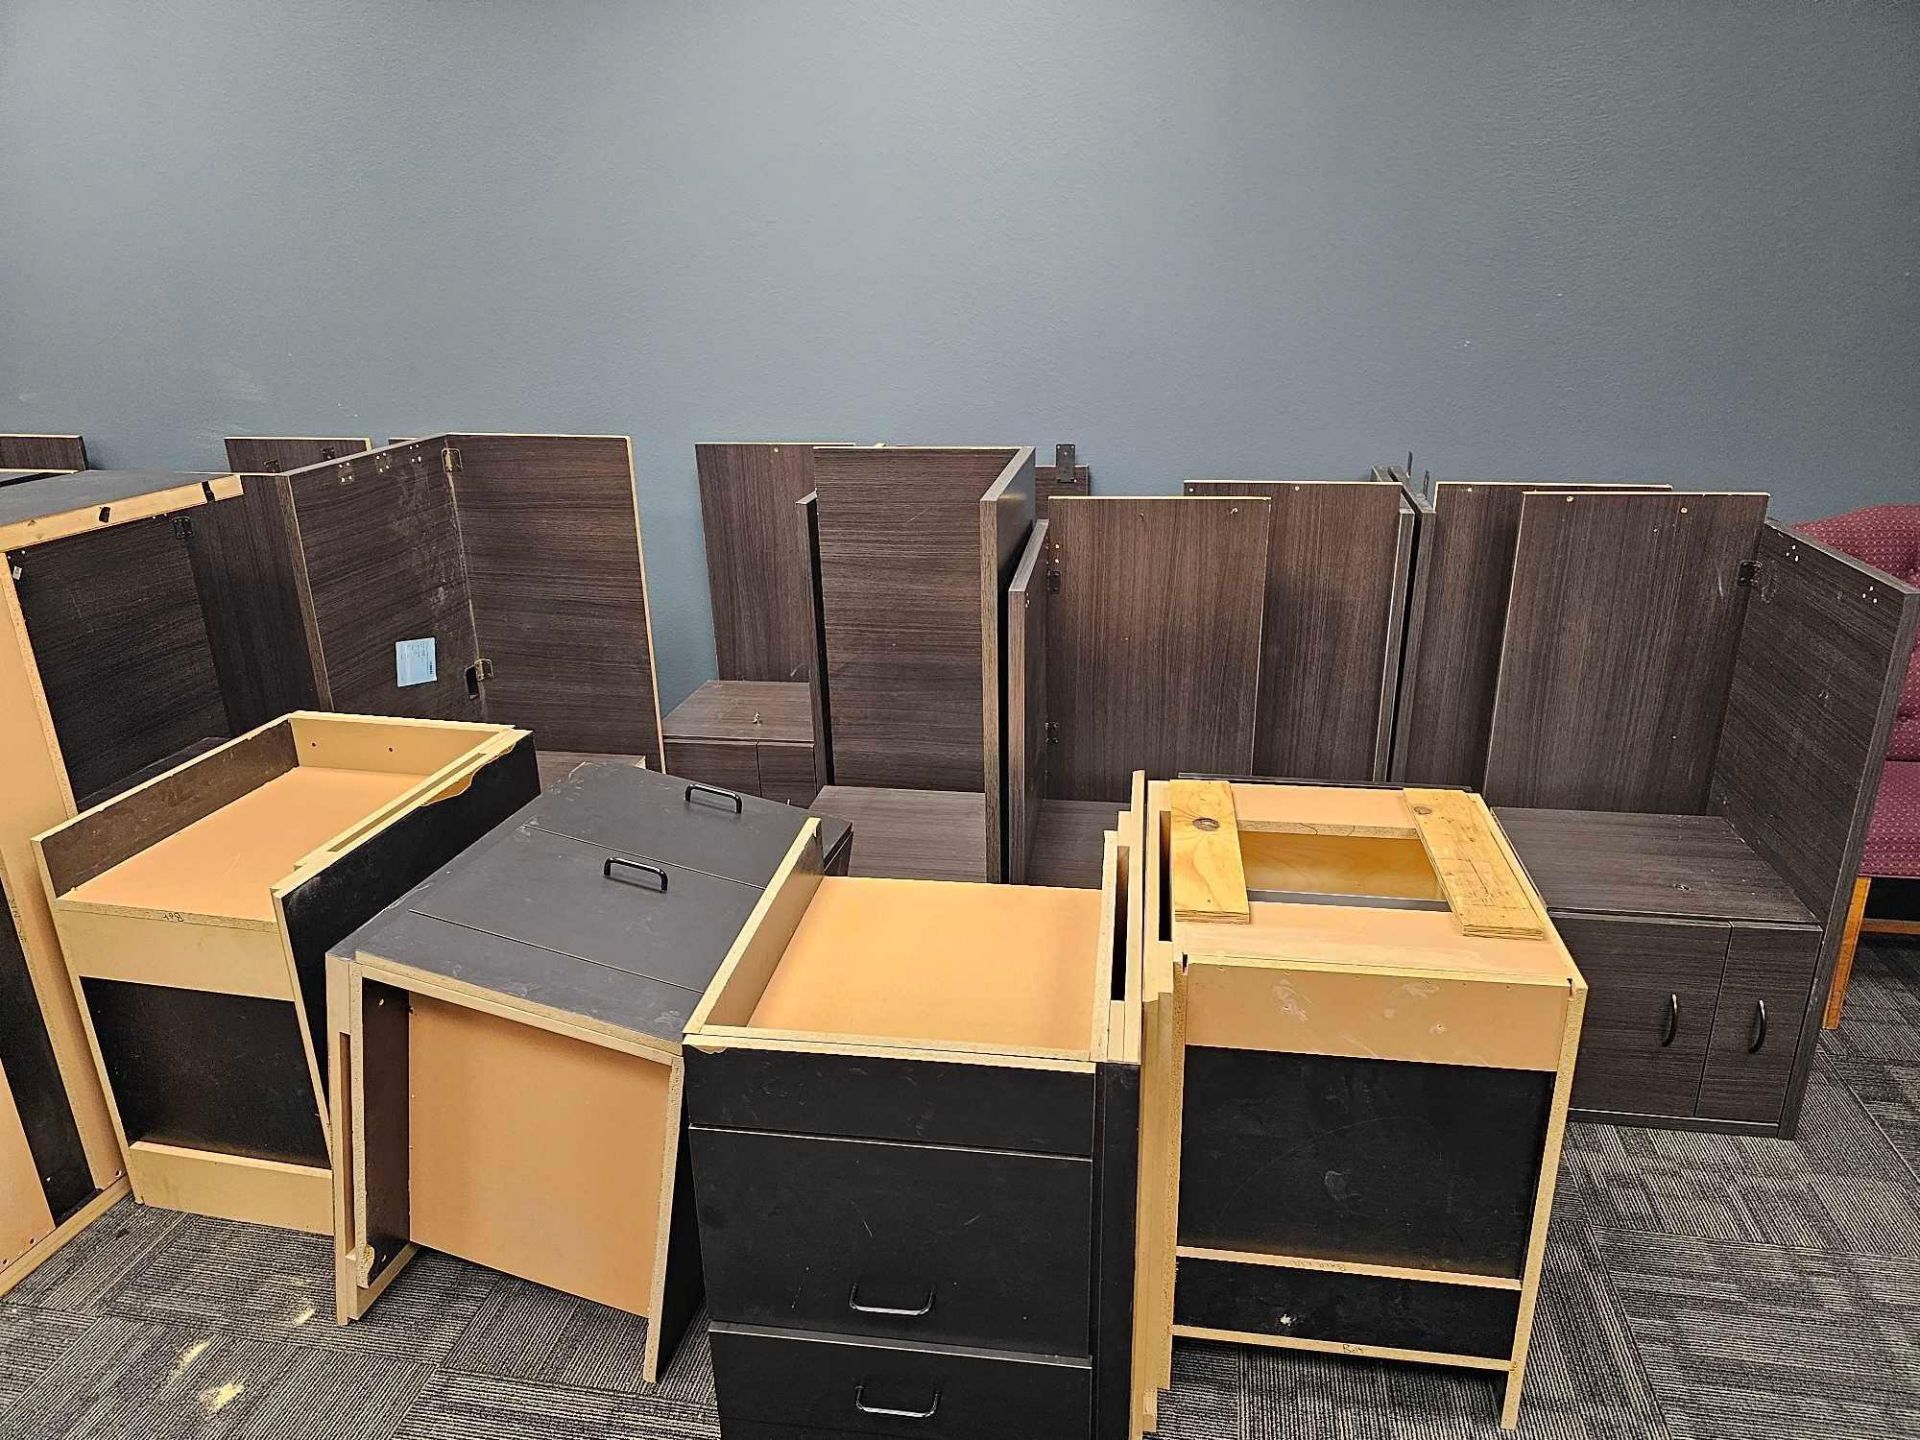 (18) WOODEN DESKS WITH FILING CABINETS AND (3) SHELVES - Image 8 of 11